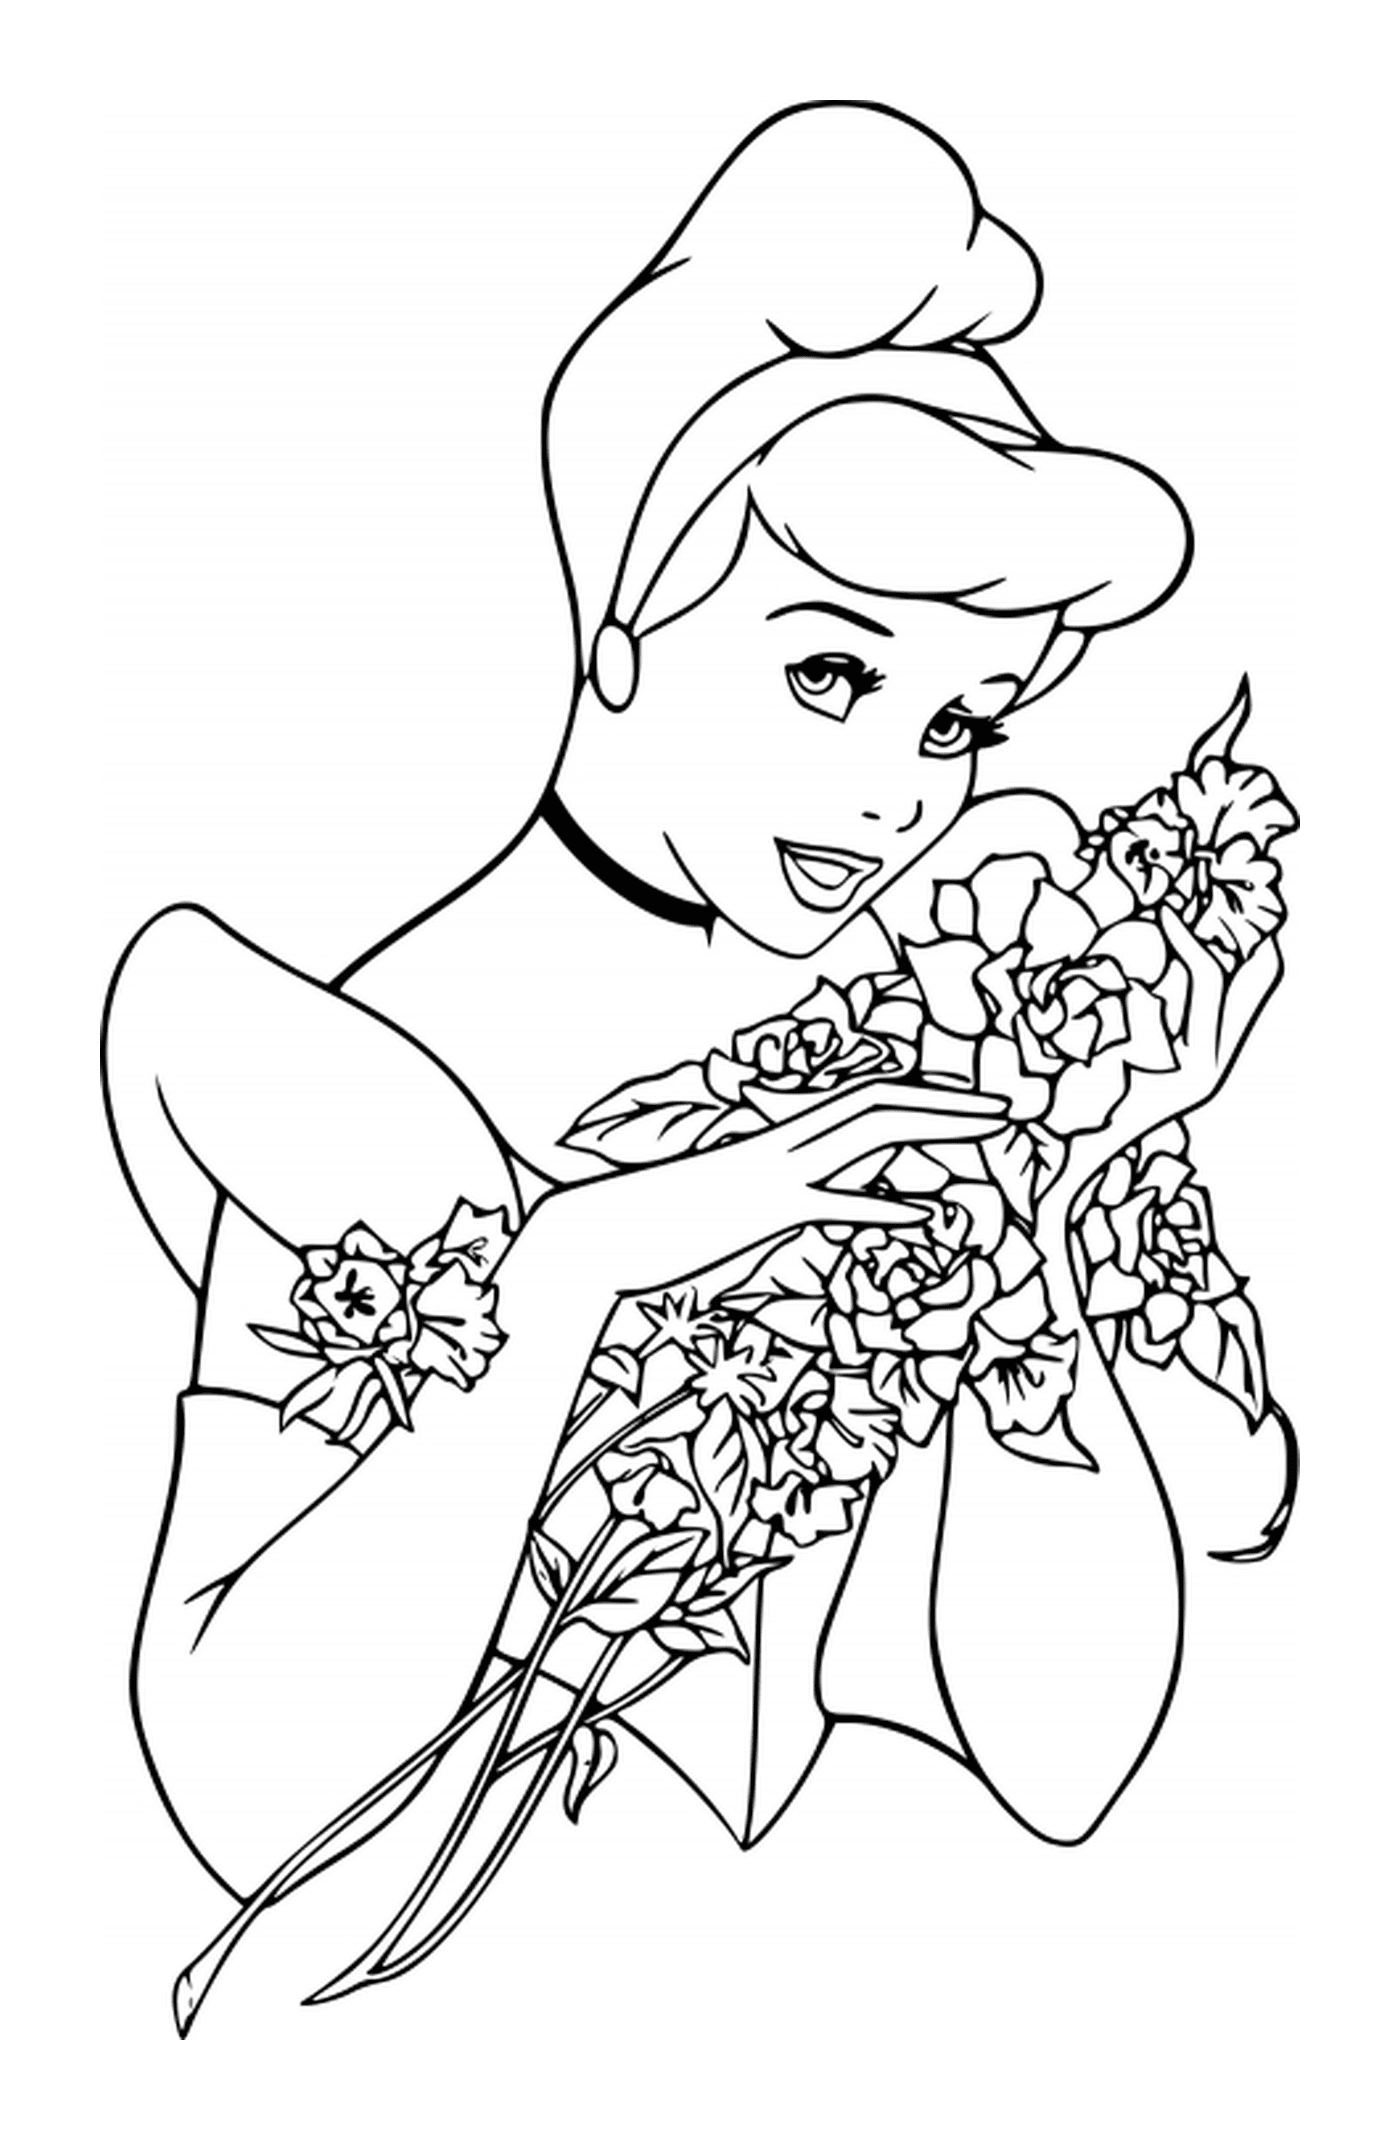  Cinderella receiving a bouquet of roses and flowers 